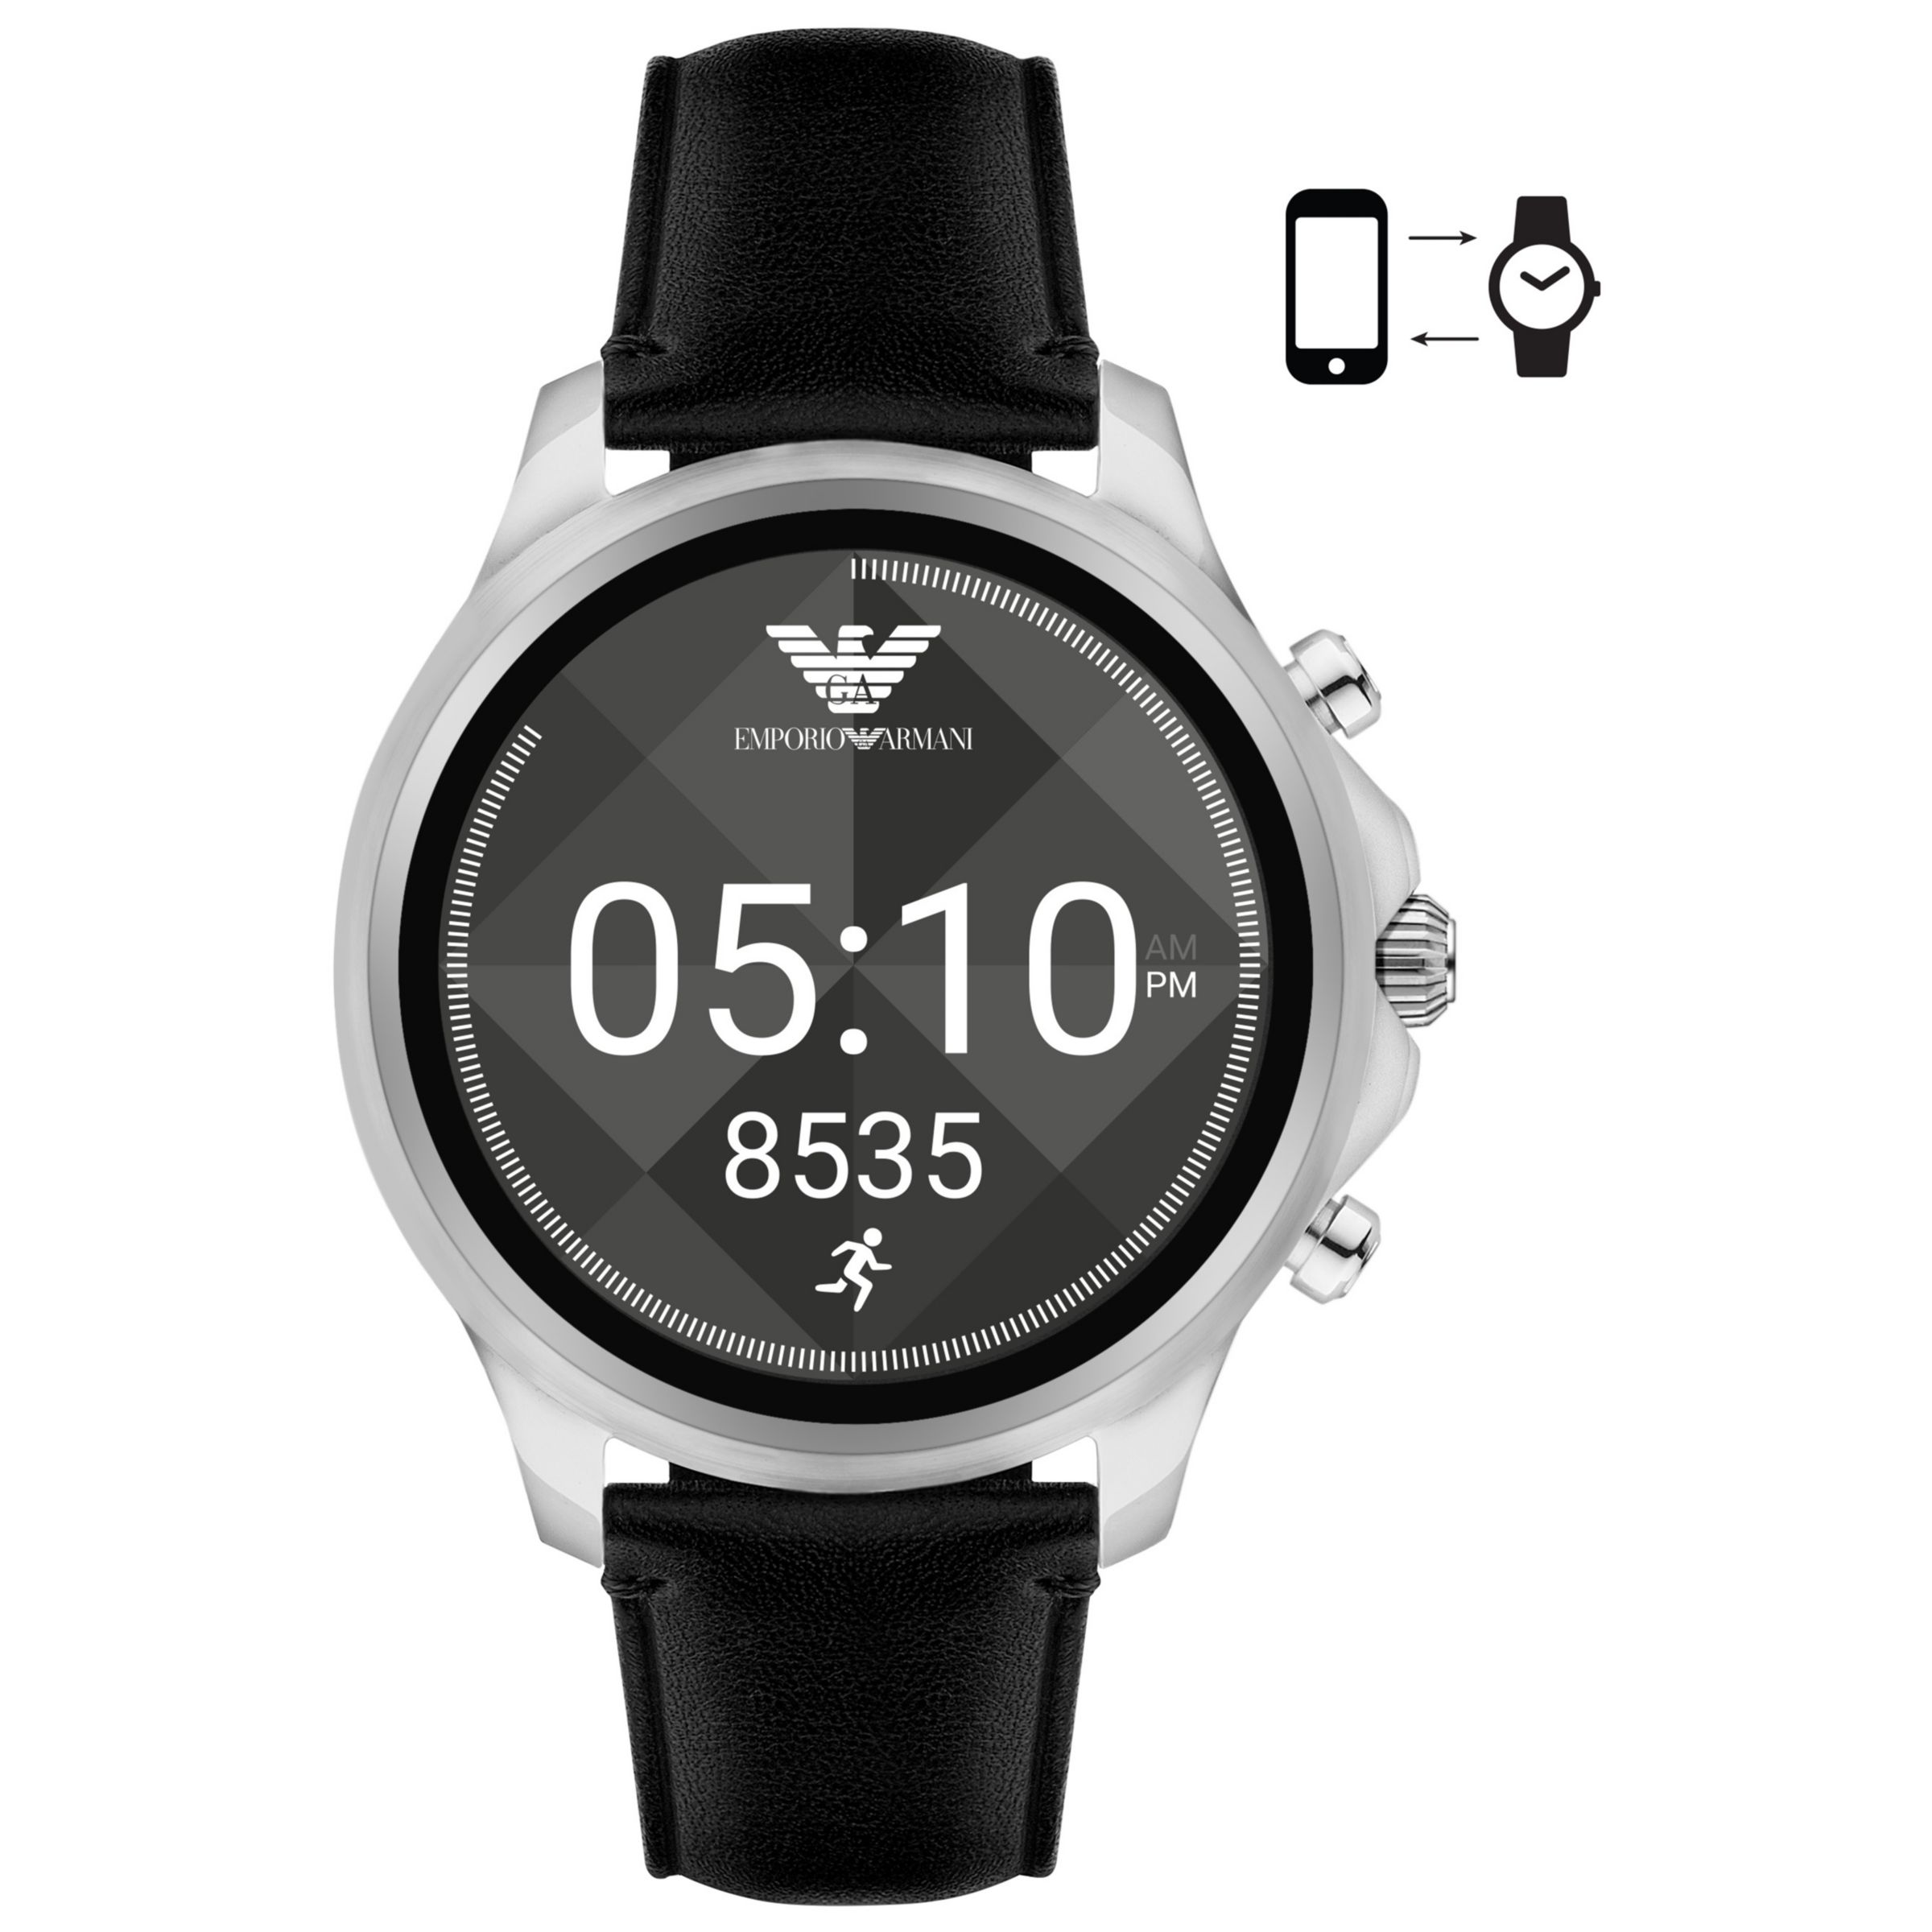 emporio armani android wear connected smartwatch